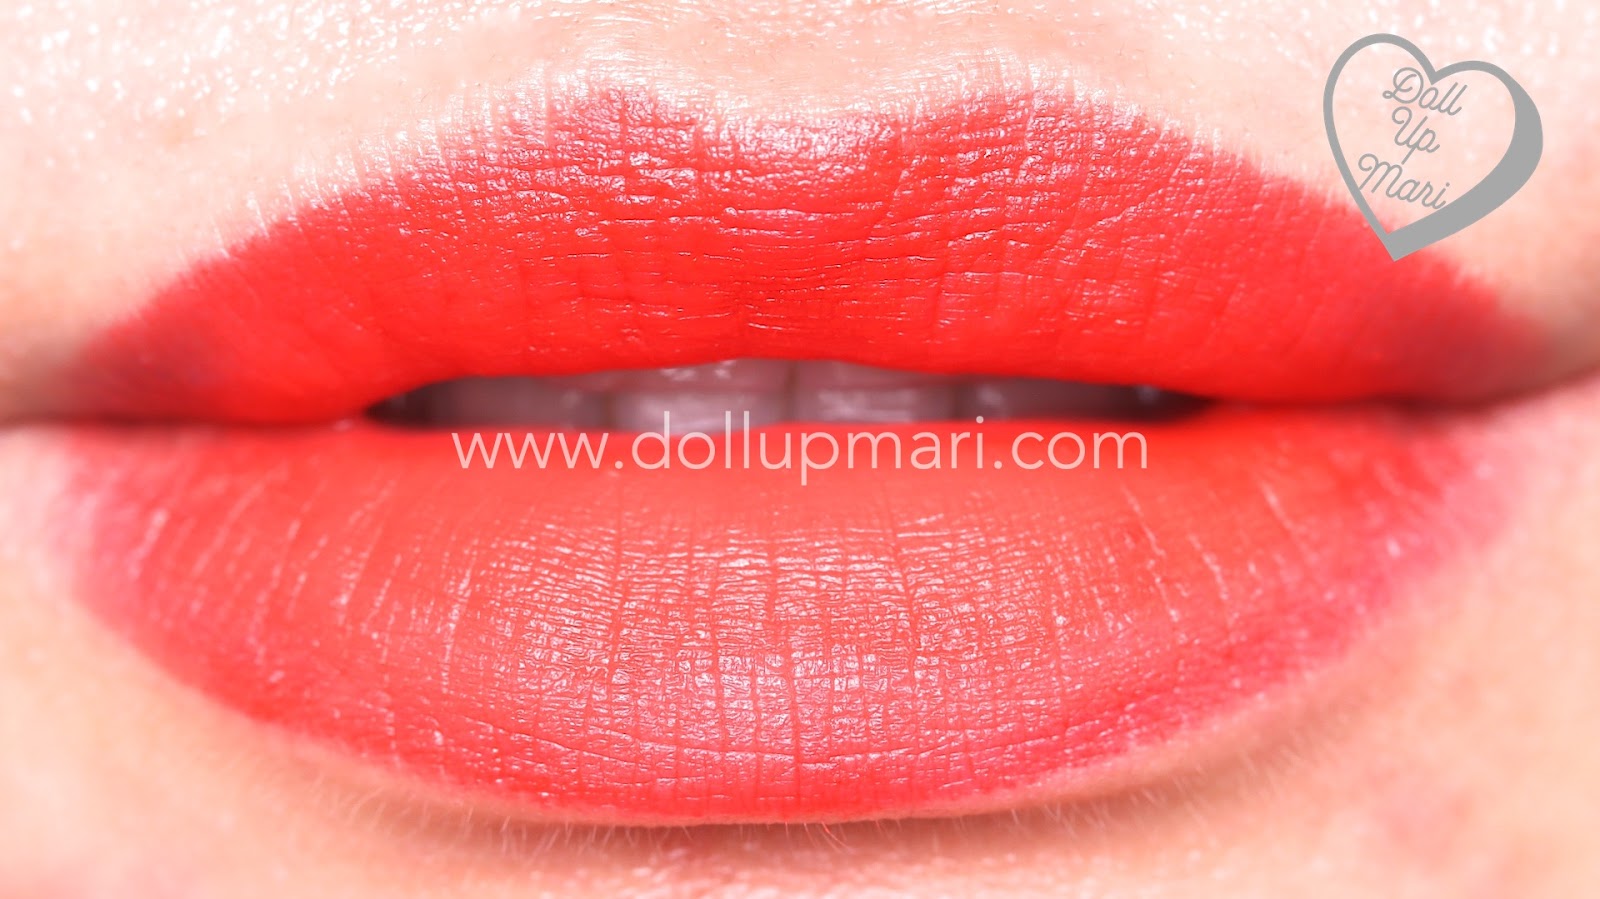 lip swatch of Coral Fever shade of AVON Perfectly Matte Lipstick